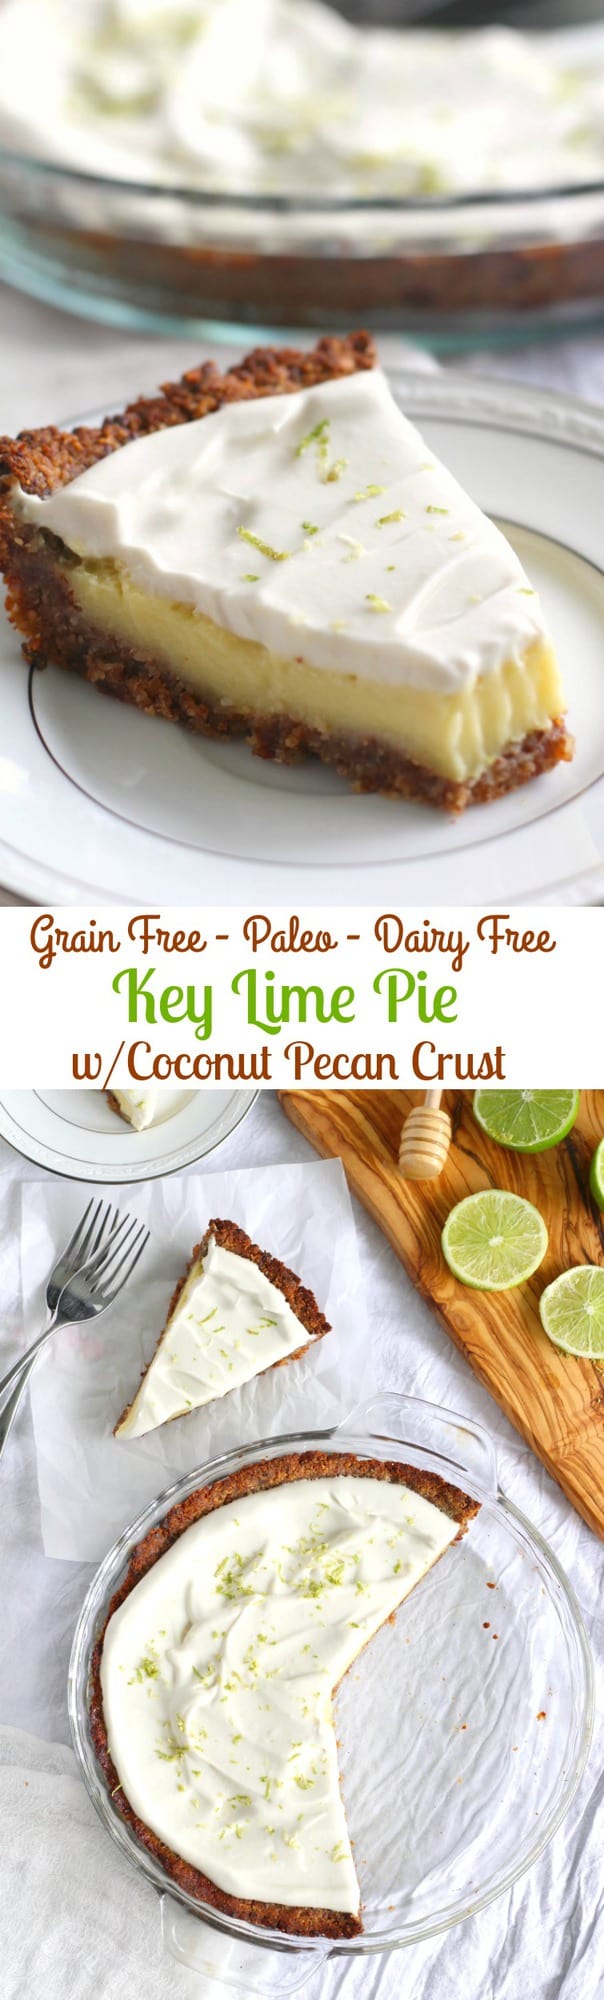 Key Lime Pie with an incredible coconut pecan crust! This addicting pie is grain free, dairy free, Paleo and so creamy and delicious